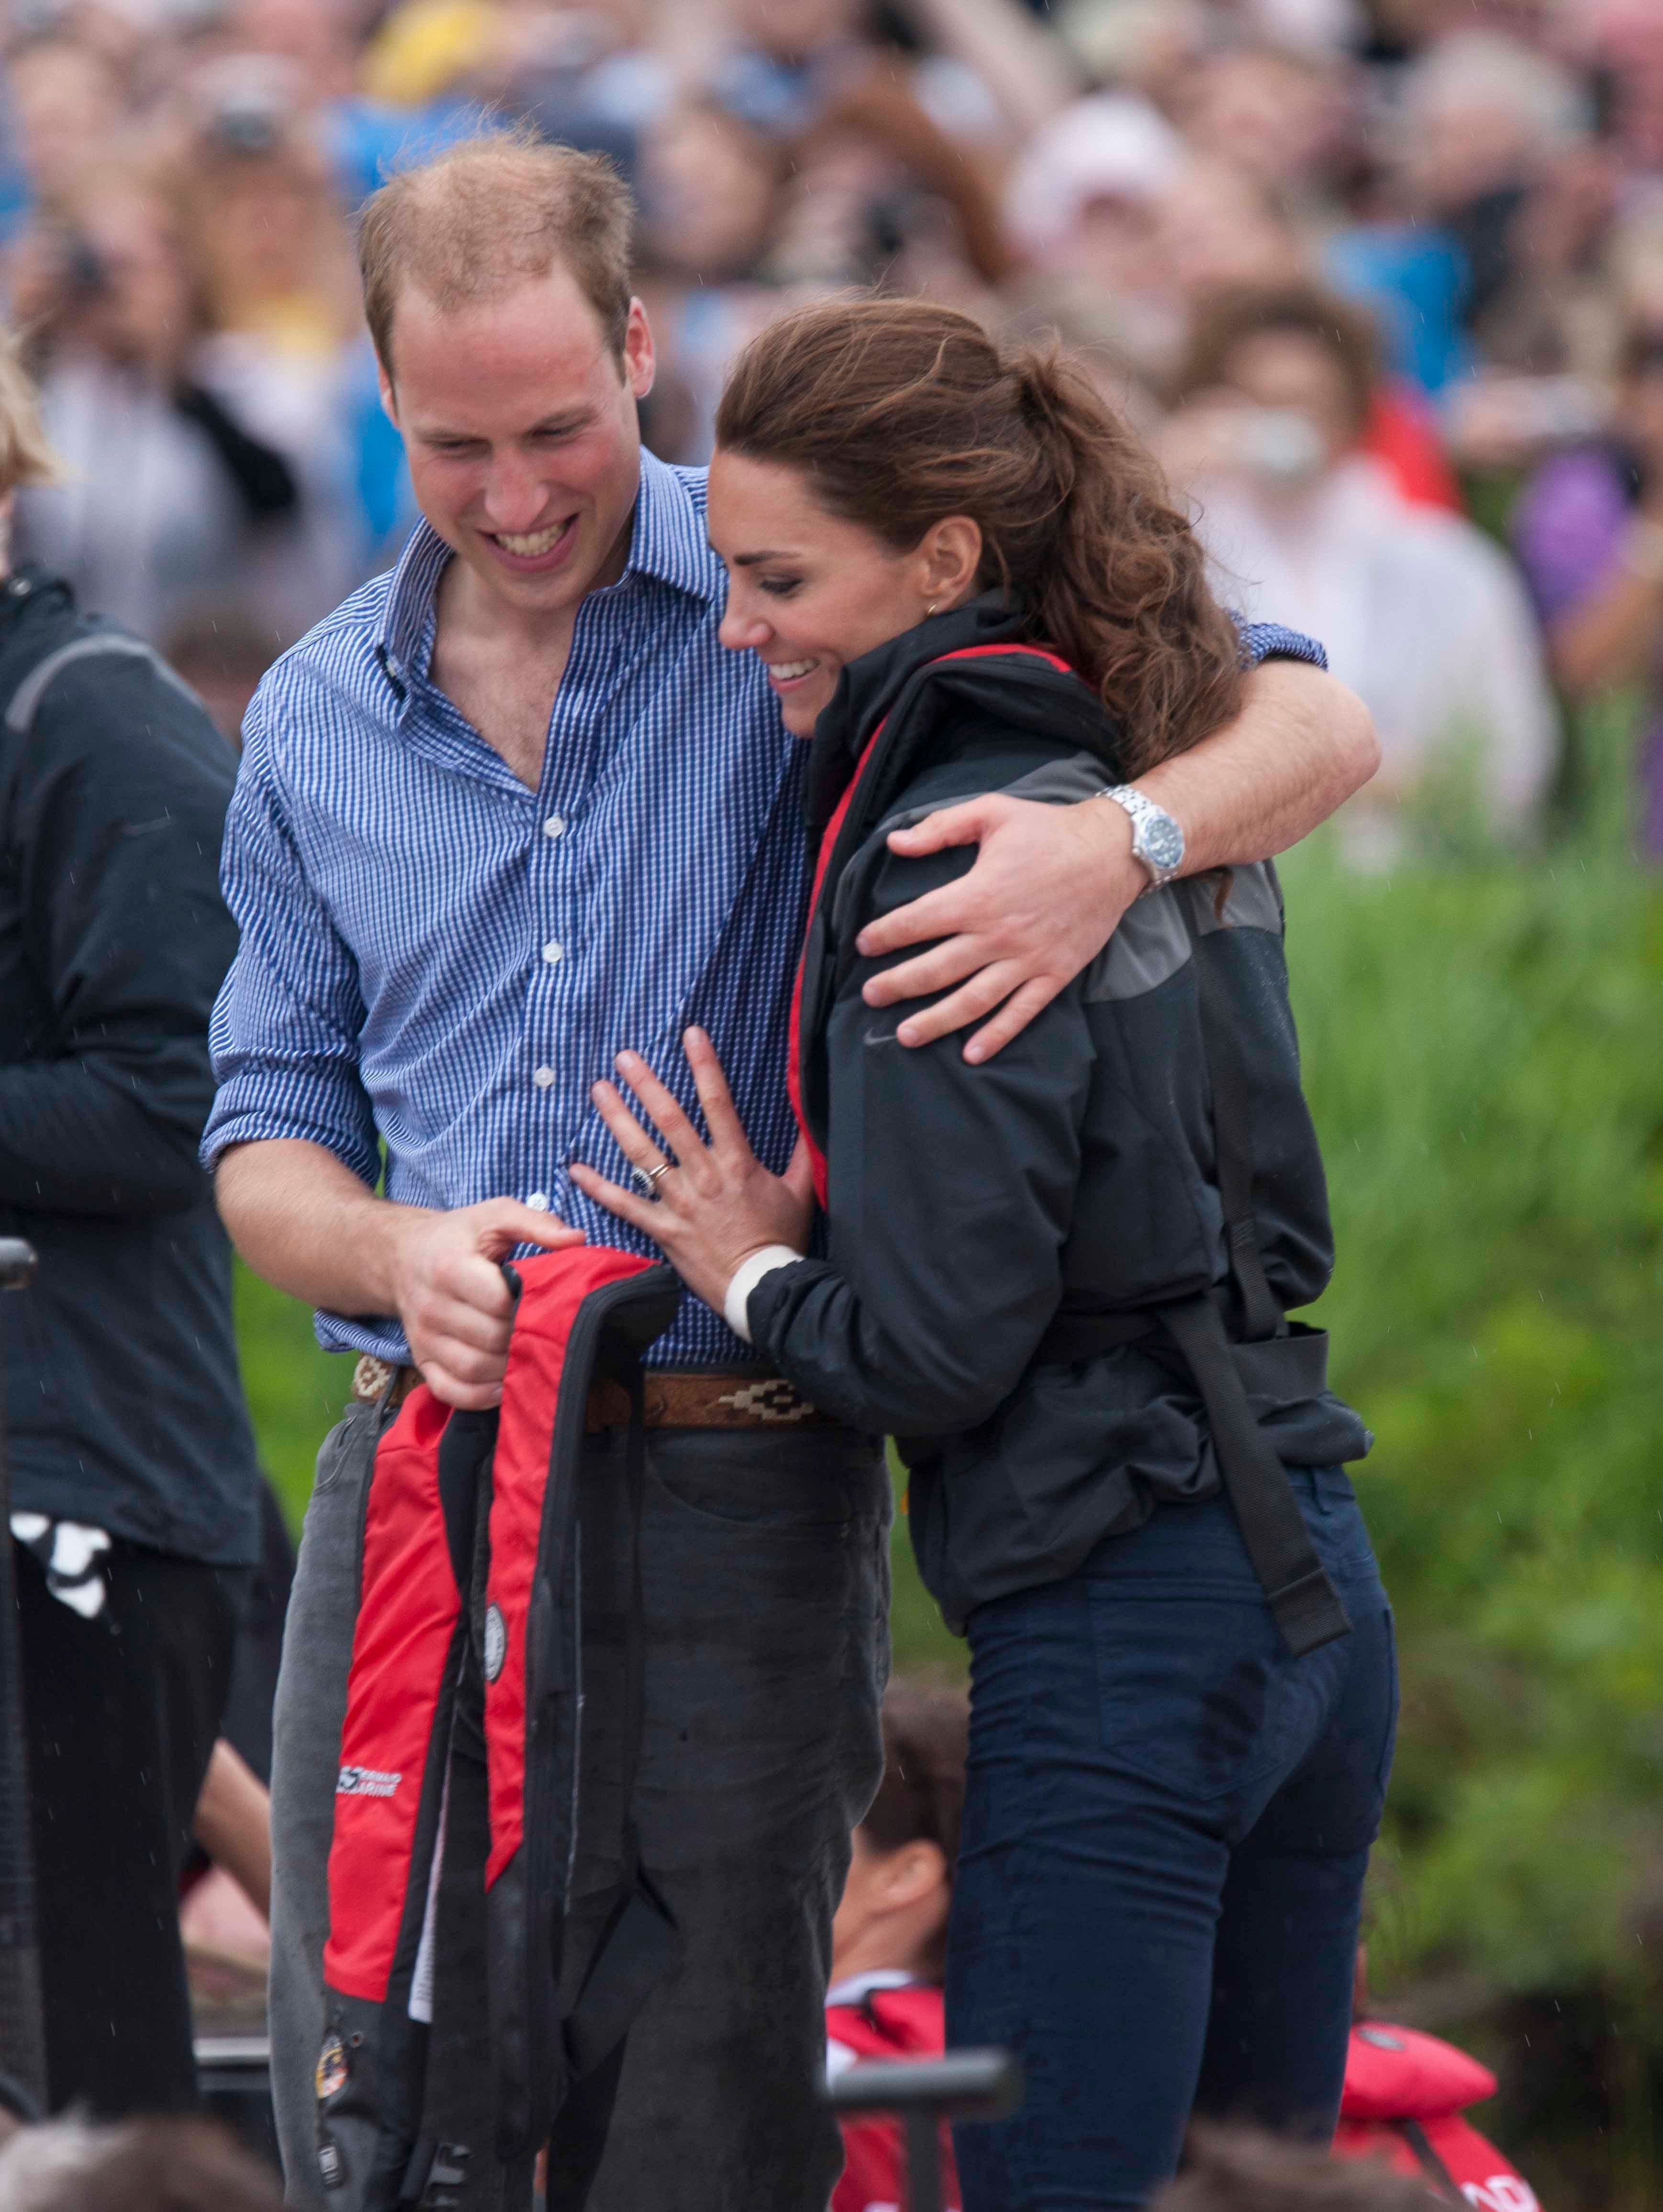 Prince William and Kate Middleton sharing a warm embrace | Photo: Getty Images